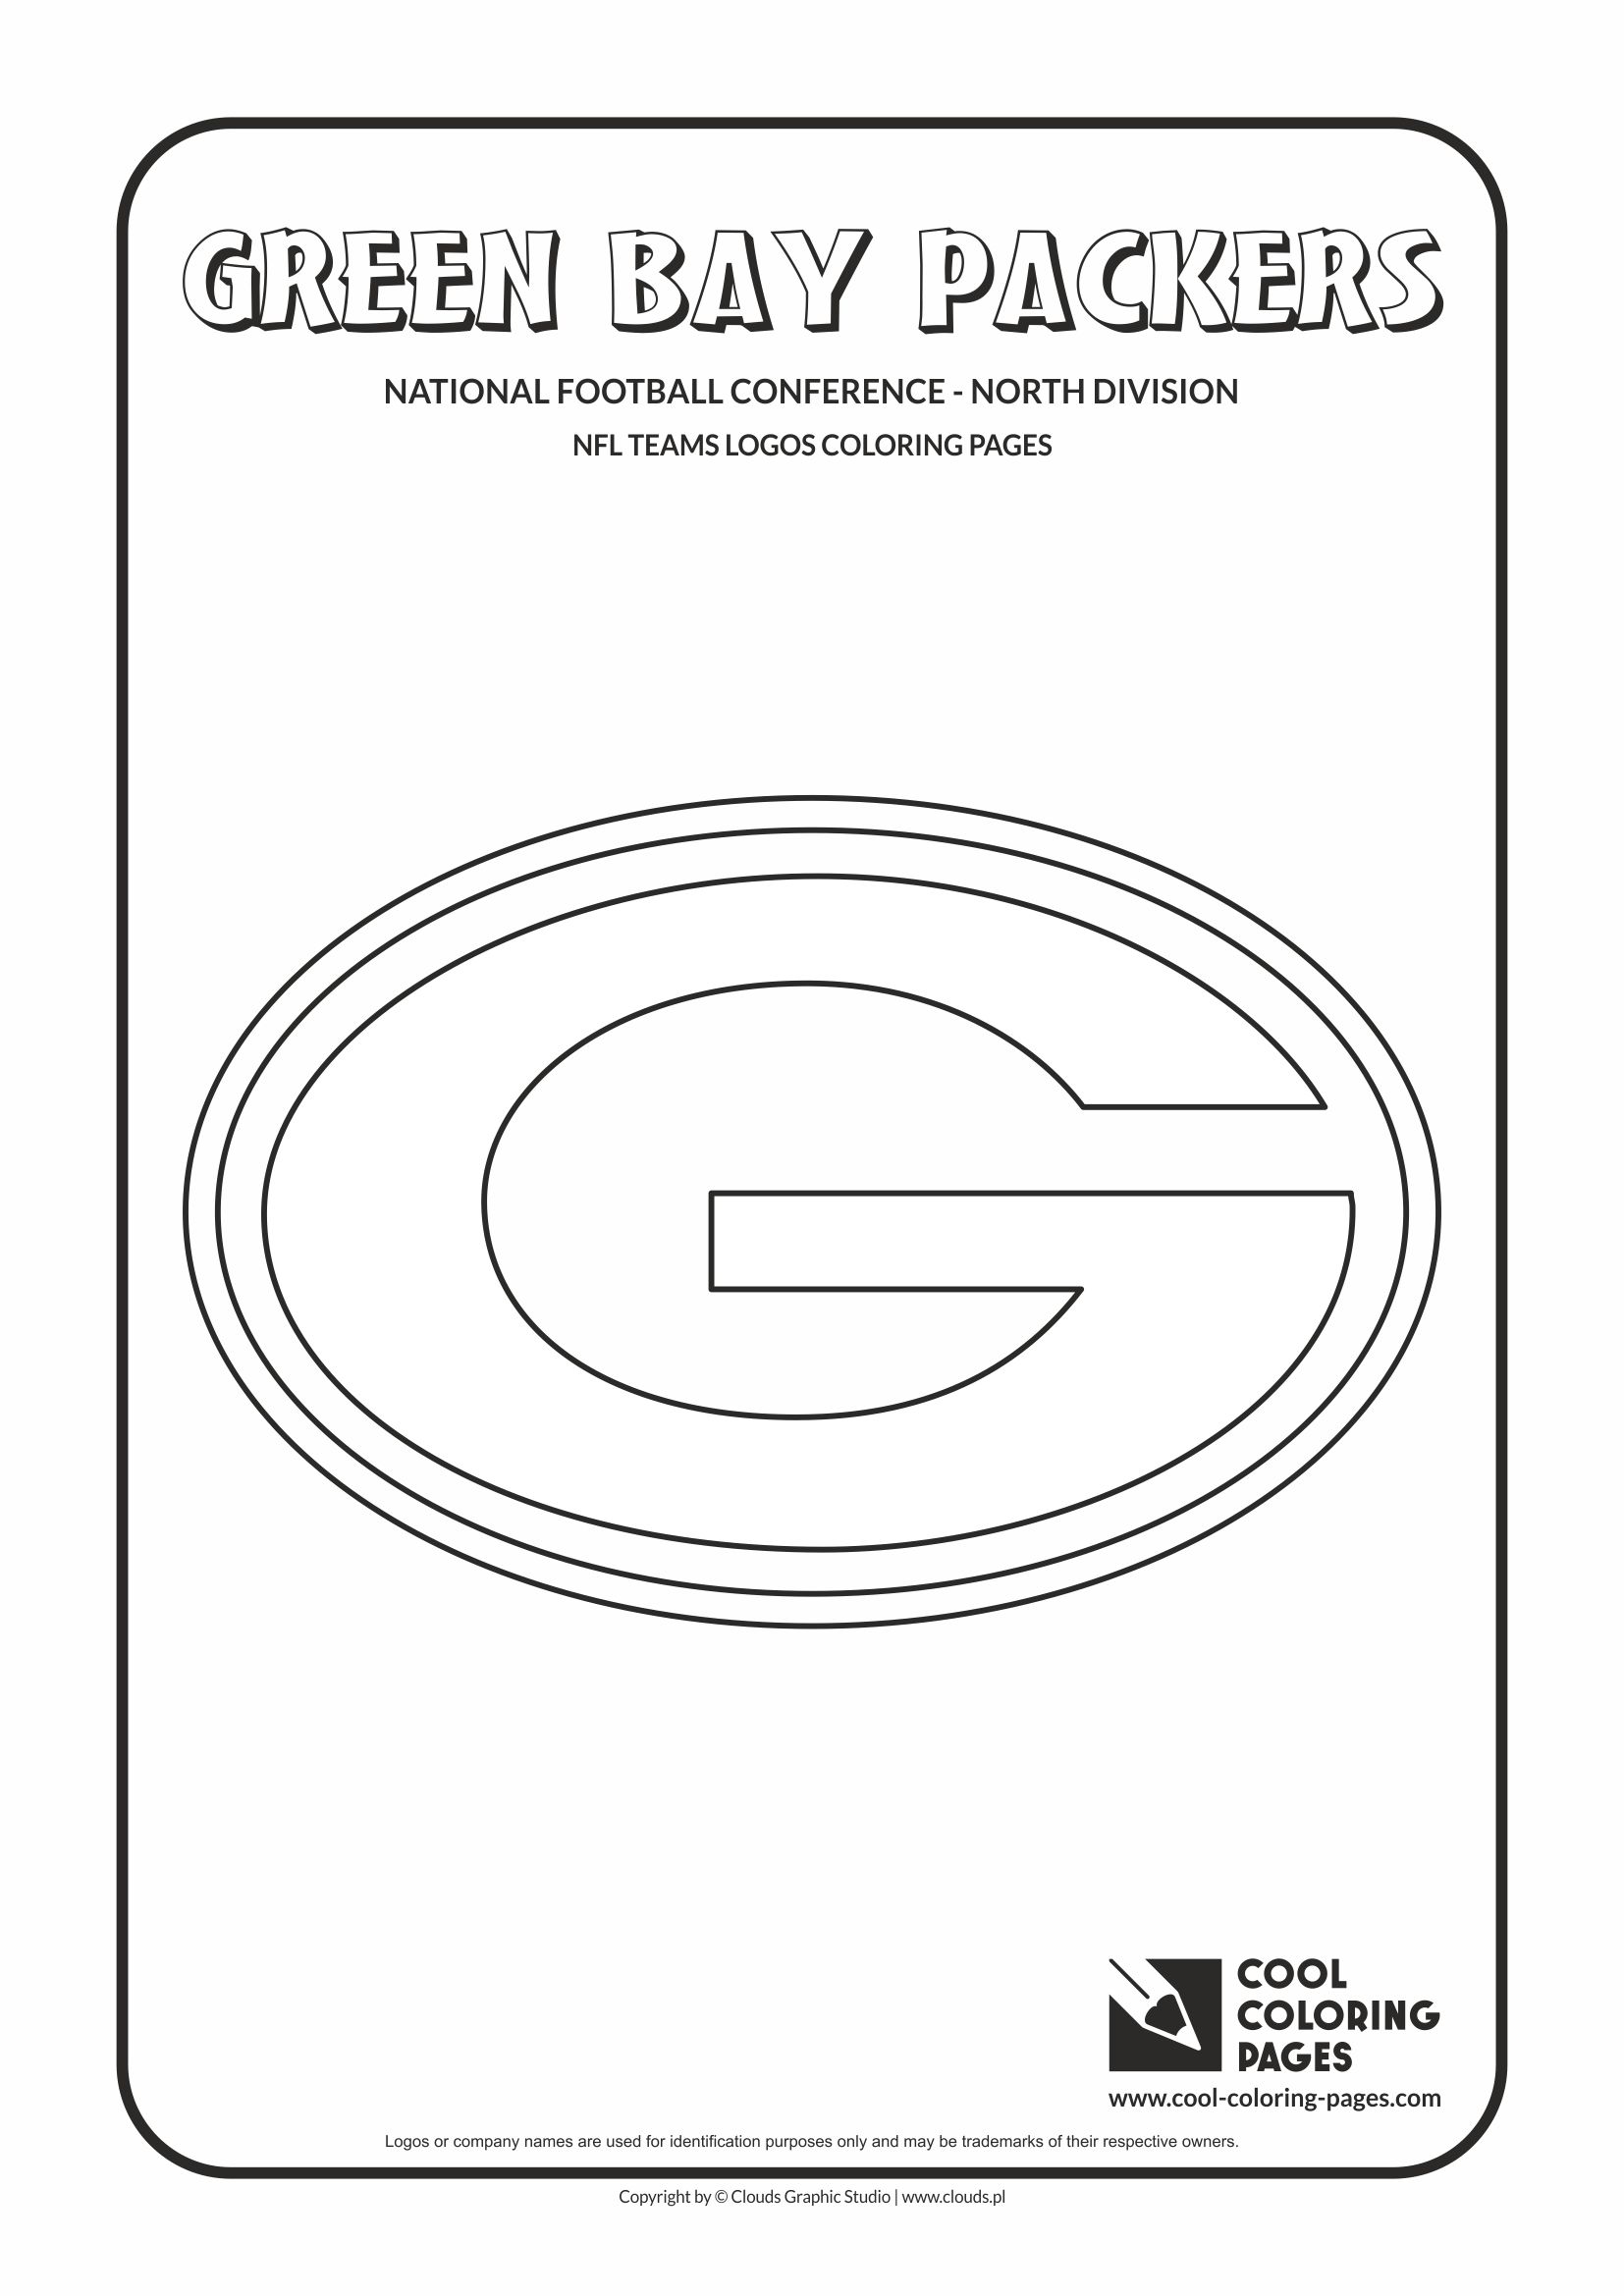 cool-coloring-pages-nfl-teams-logos-coloring-pages-cool-coloring